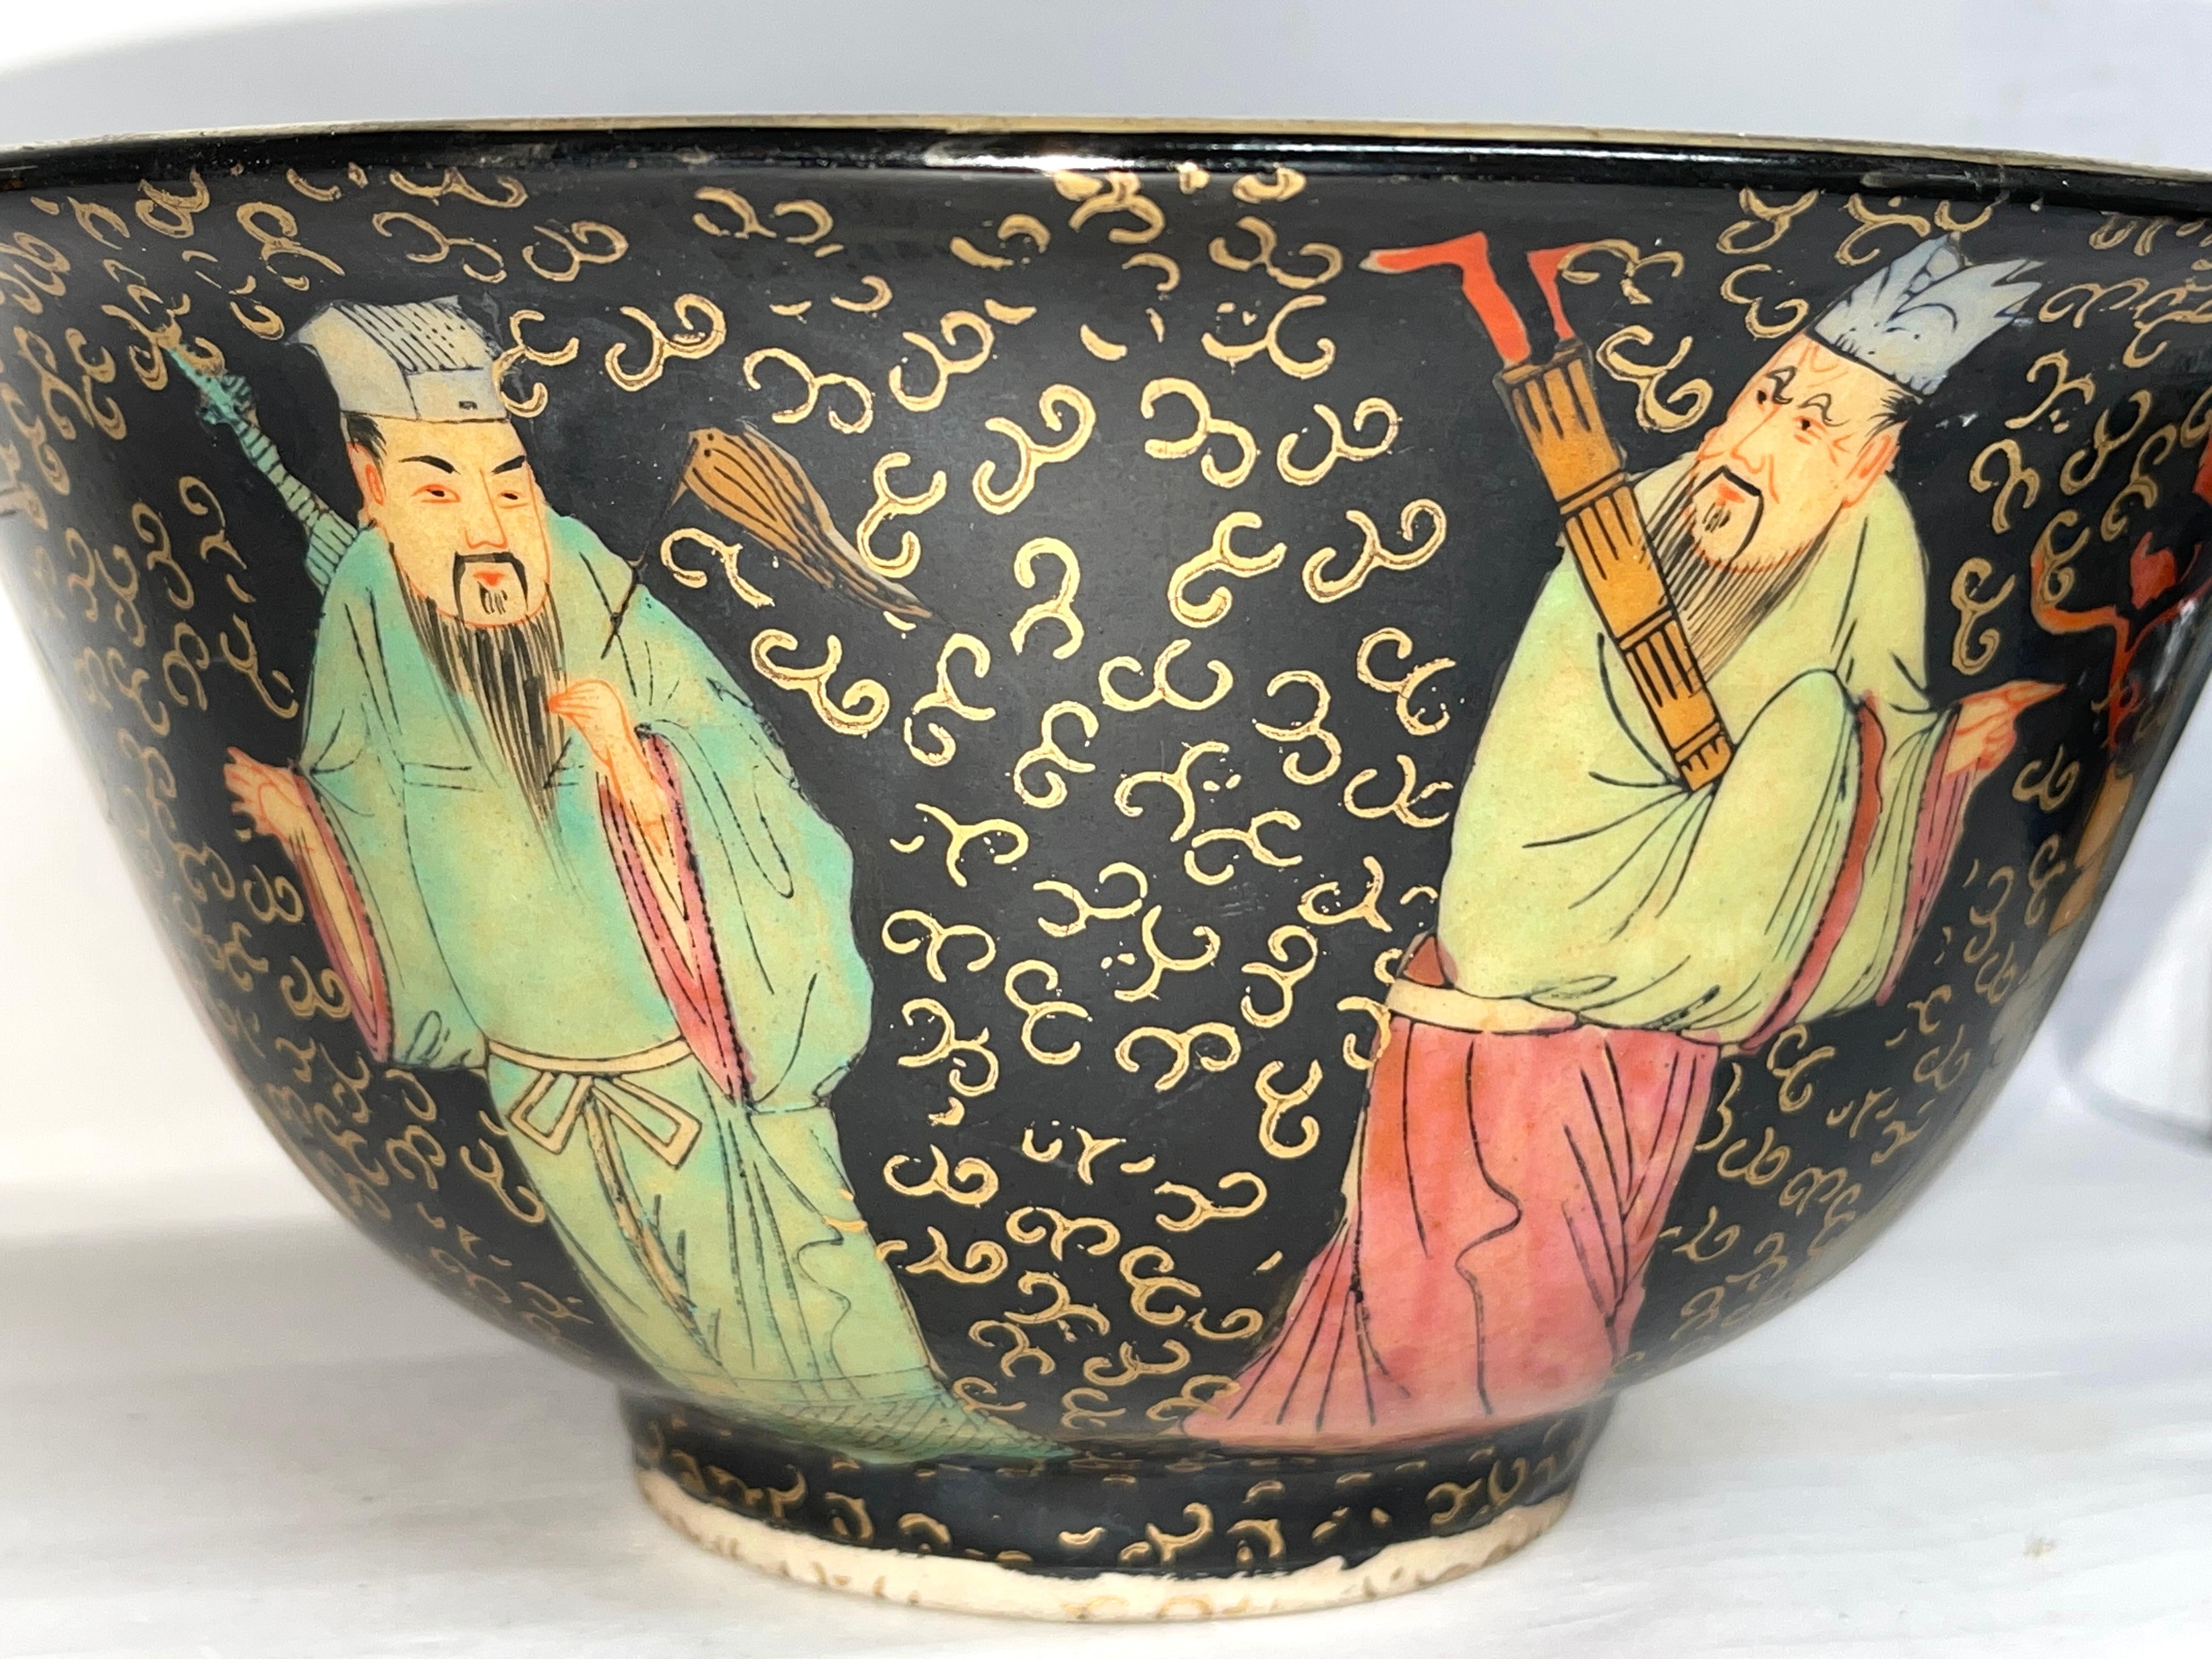 Pair of Antique Chinese Ceramic Bowls, 20th Century, Asian Art For Sale 11